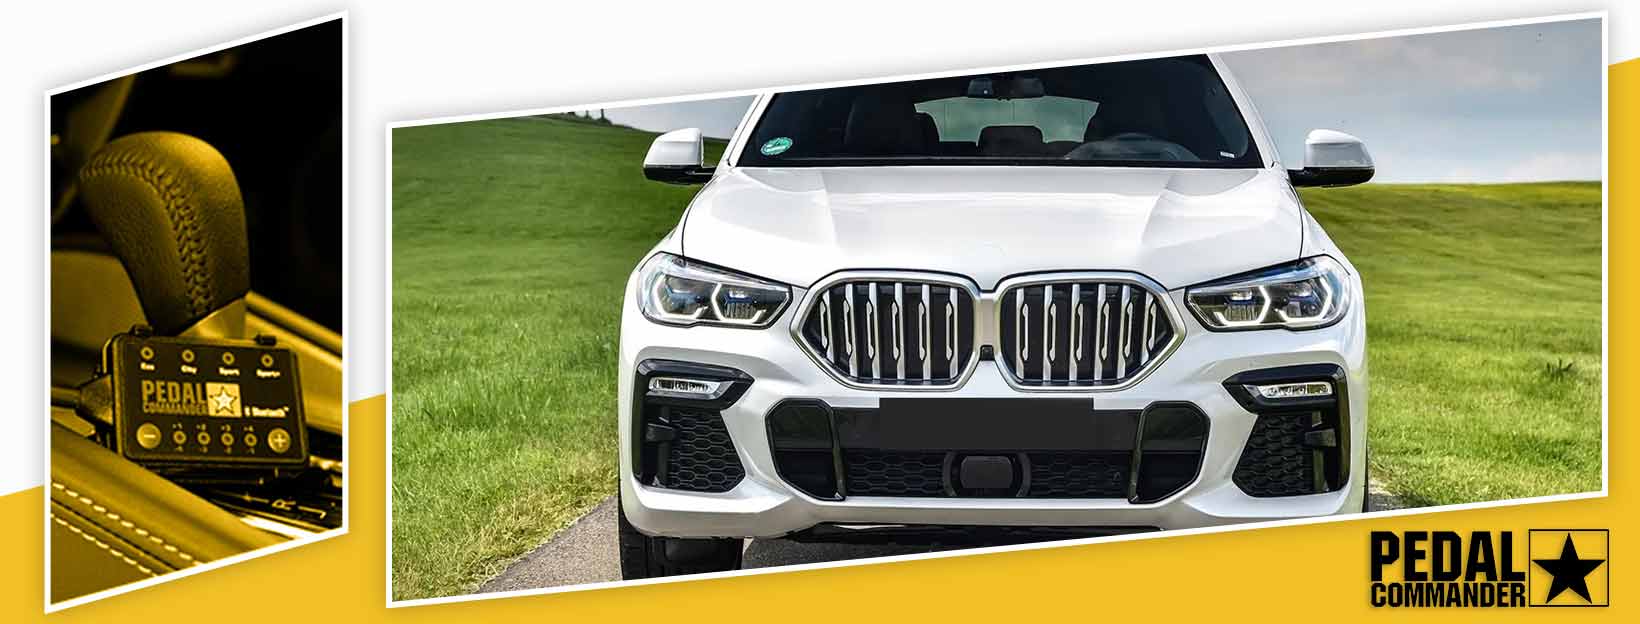 Pedal Commander for BMW X4 - side